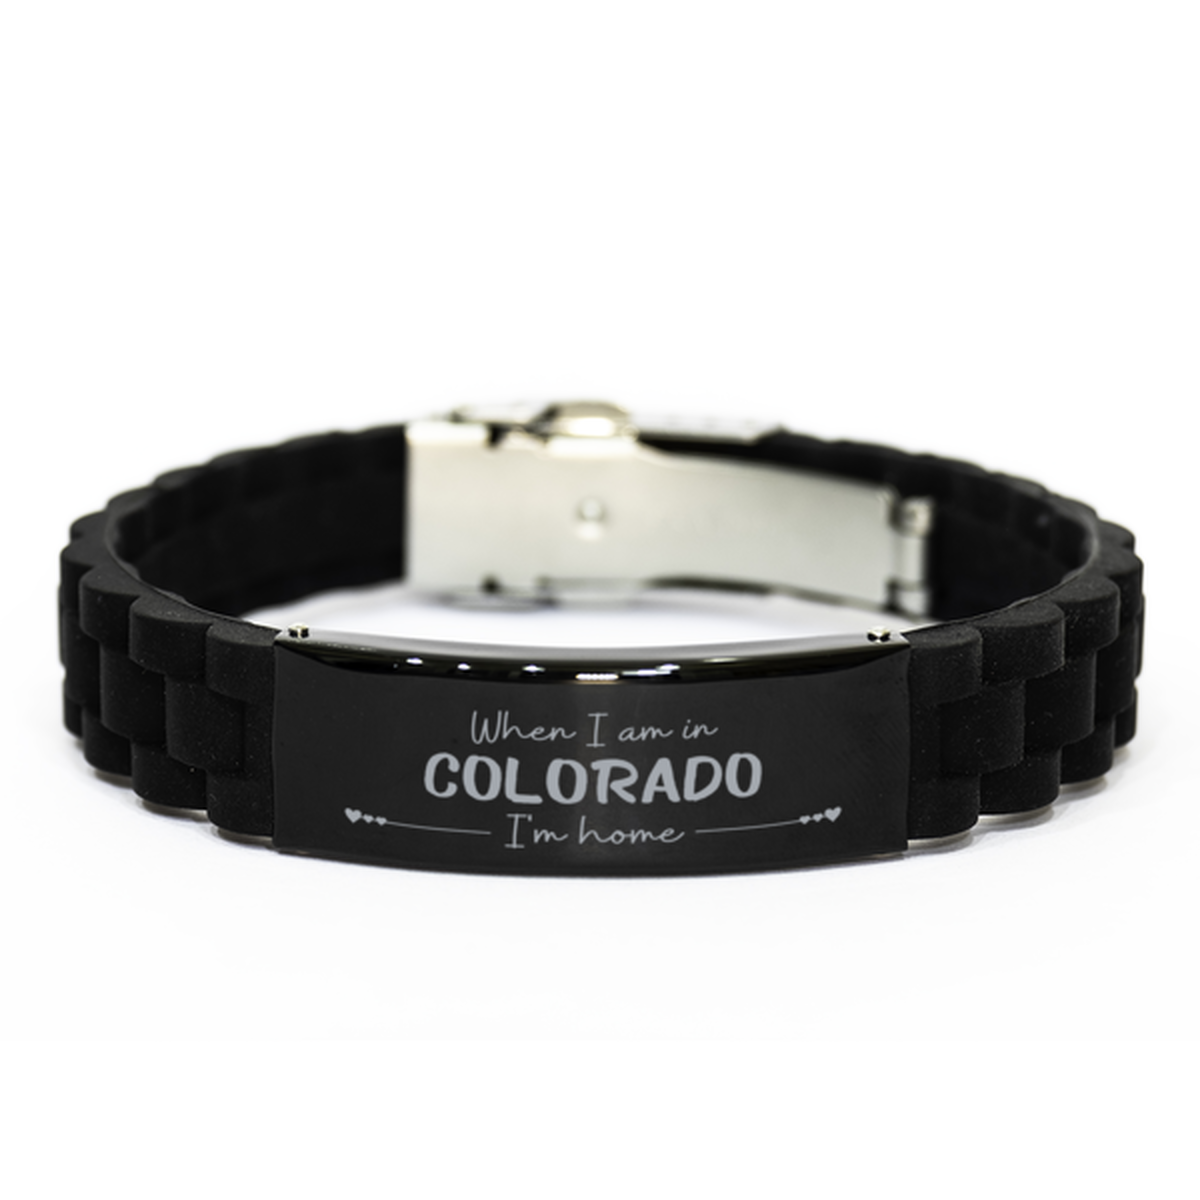 When I am in Colorado I'm home Black Glidelock Clasp Bracelet, Cheap Gifts For Colorado, State Colorado Birthday Gifts for Friends Coworker